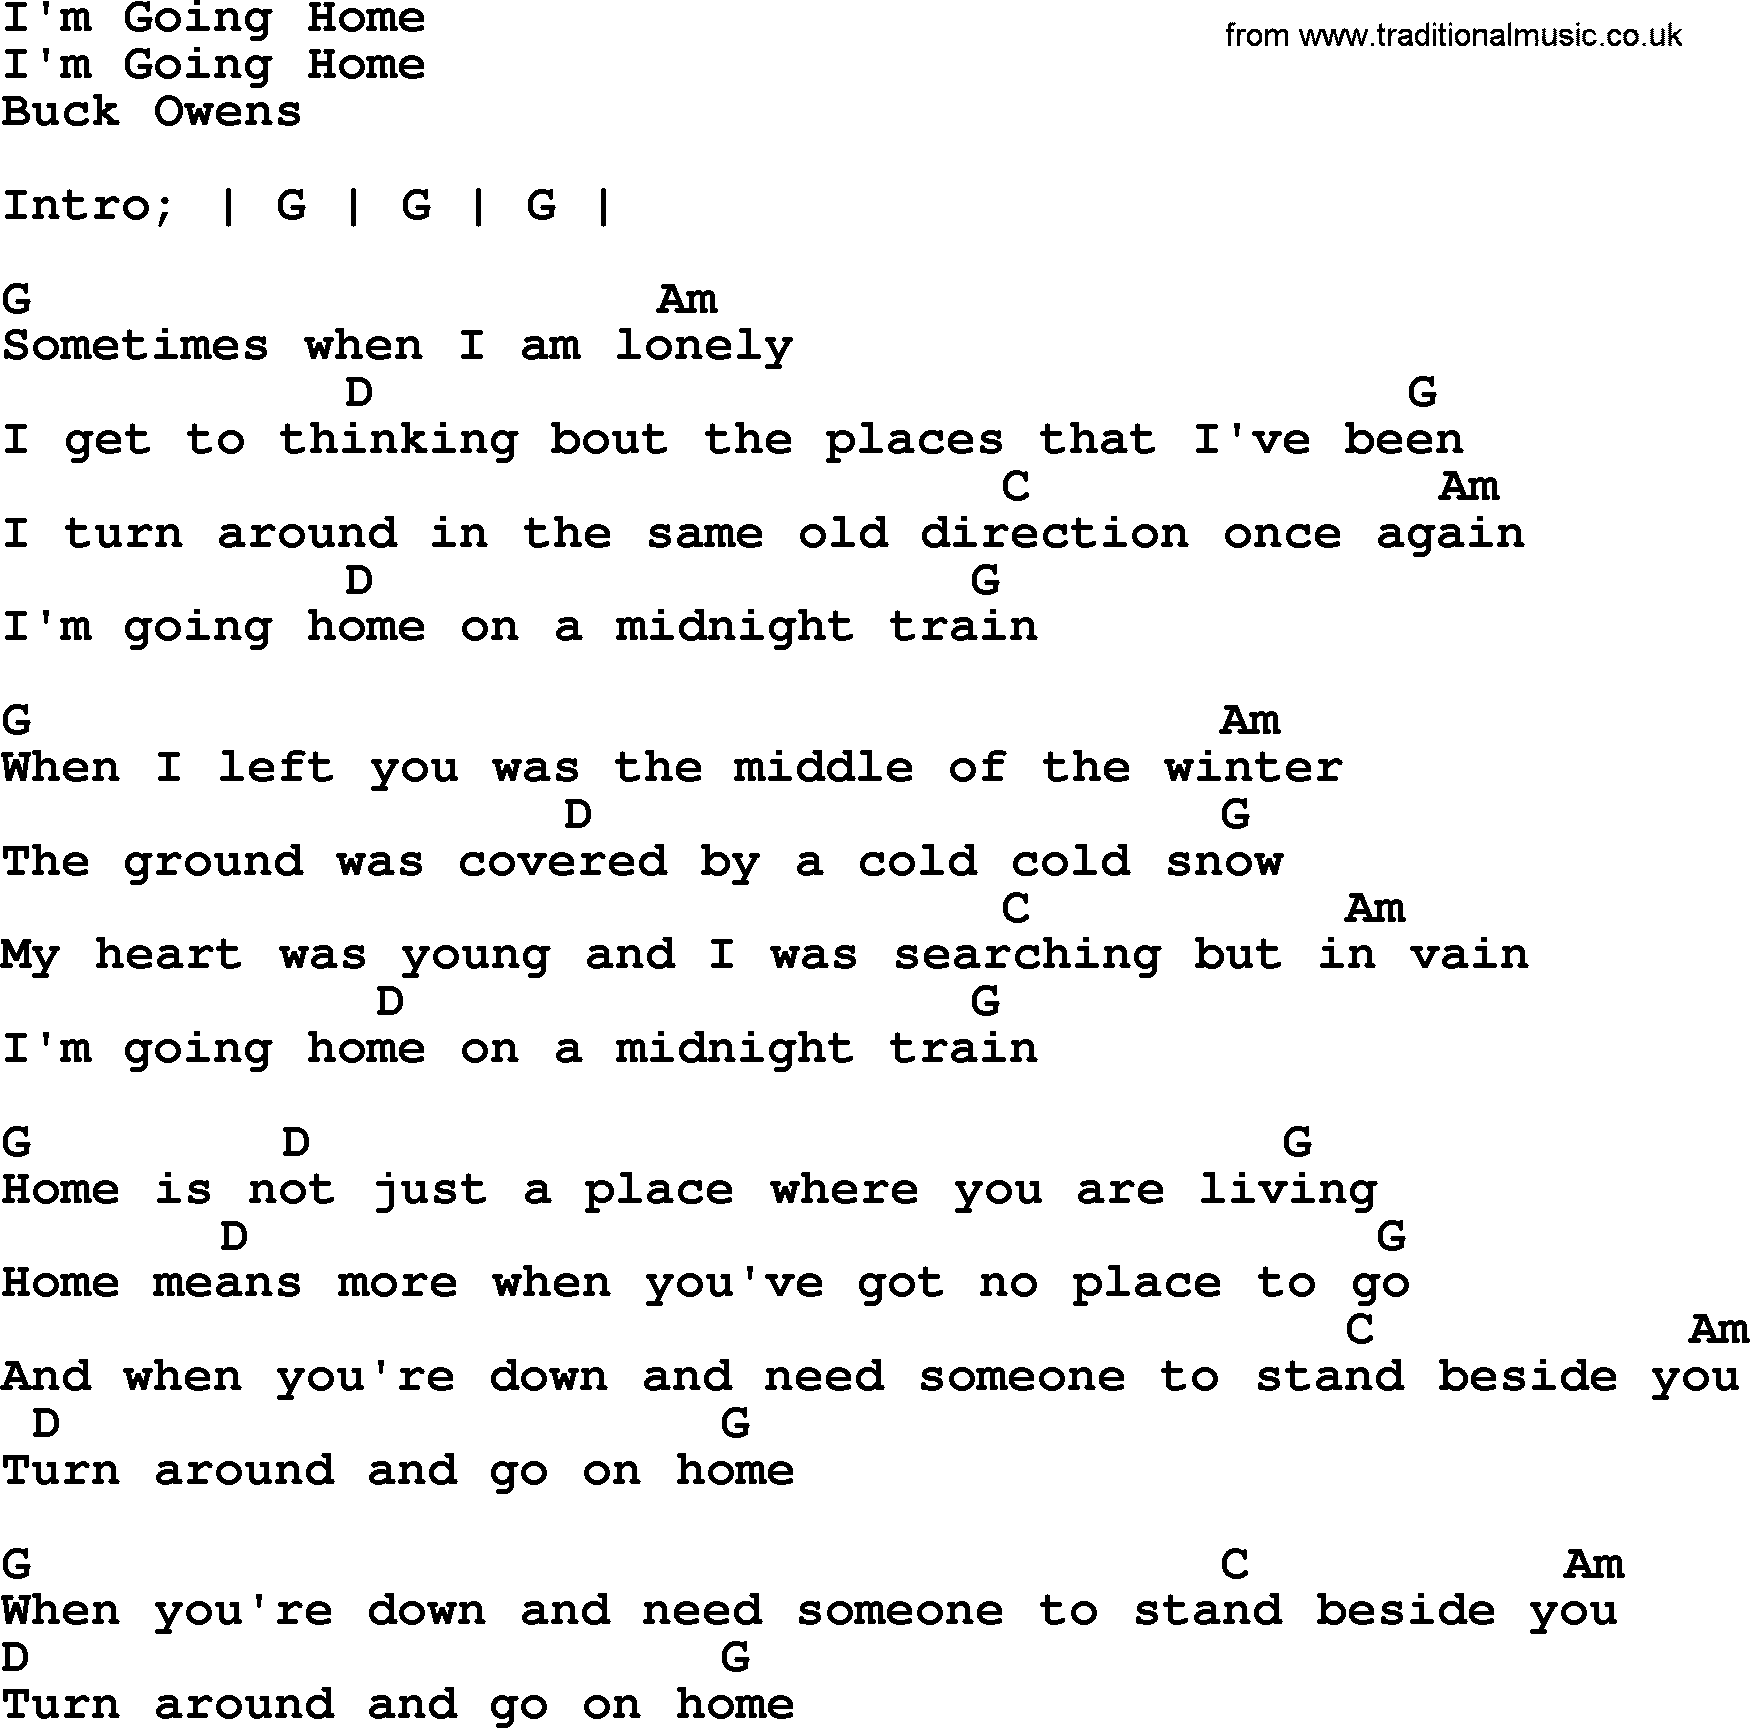 Bluegrass song: I'm Going Home, lyrics and chords